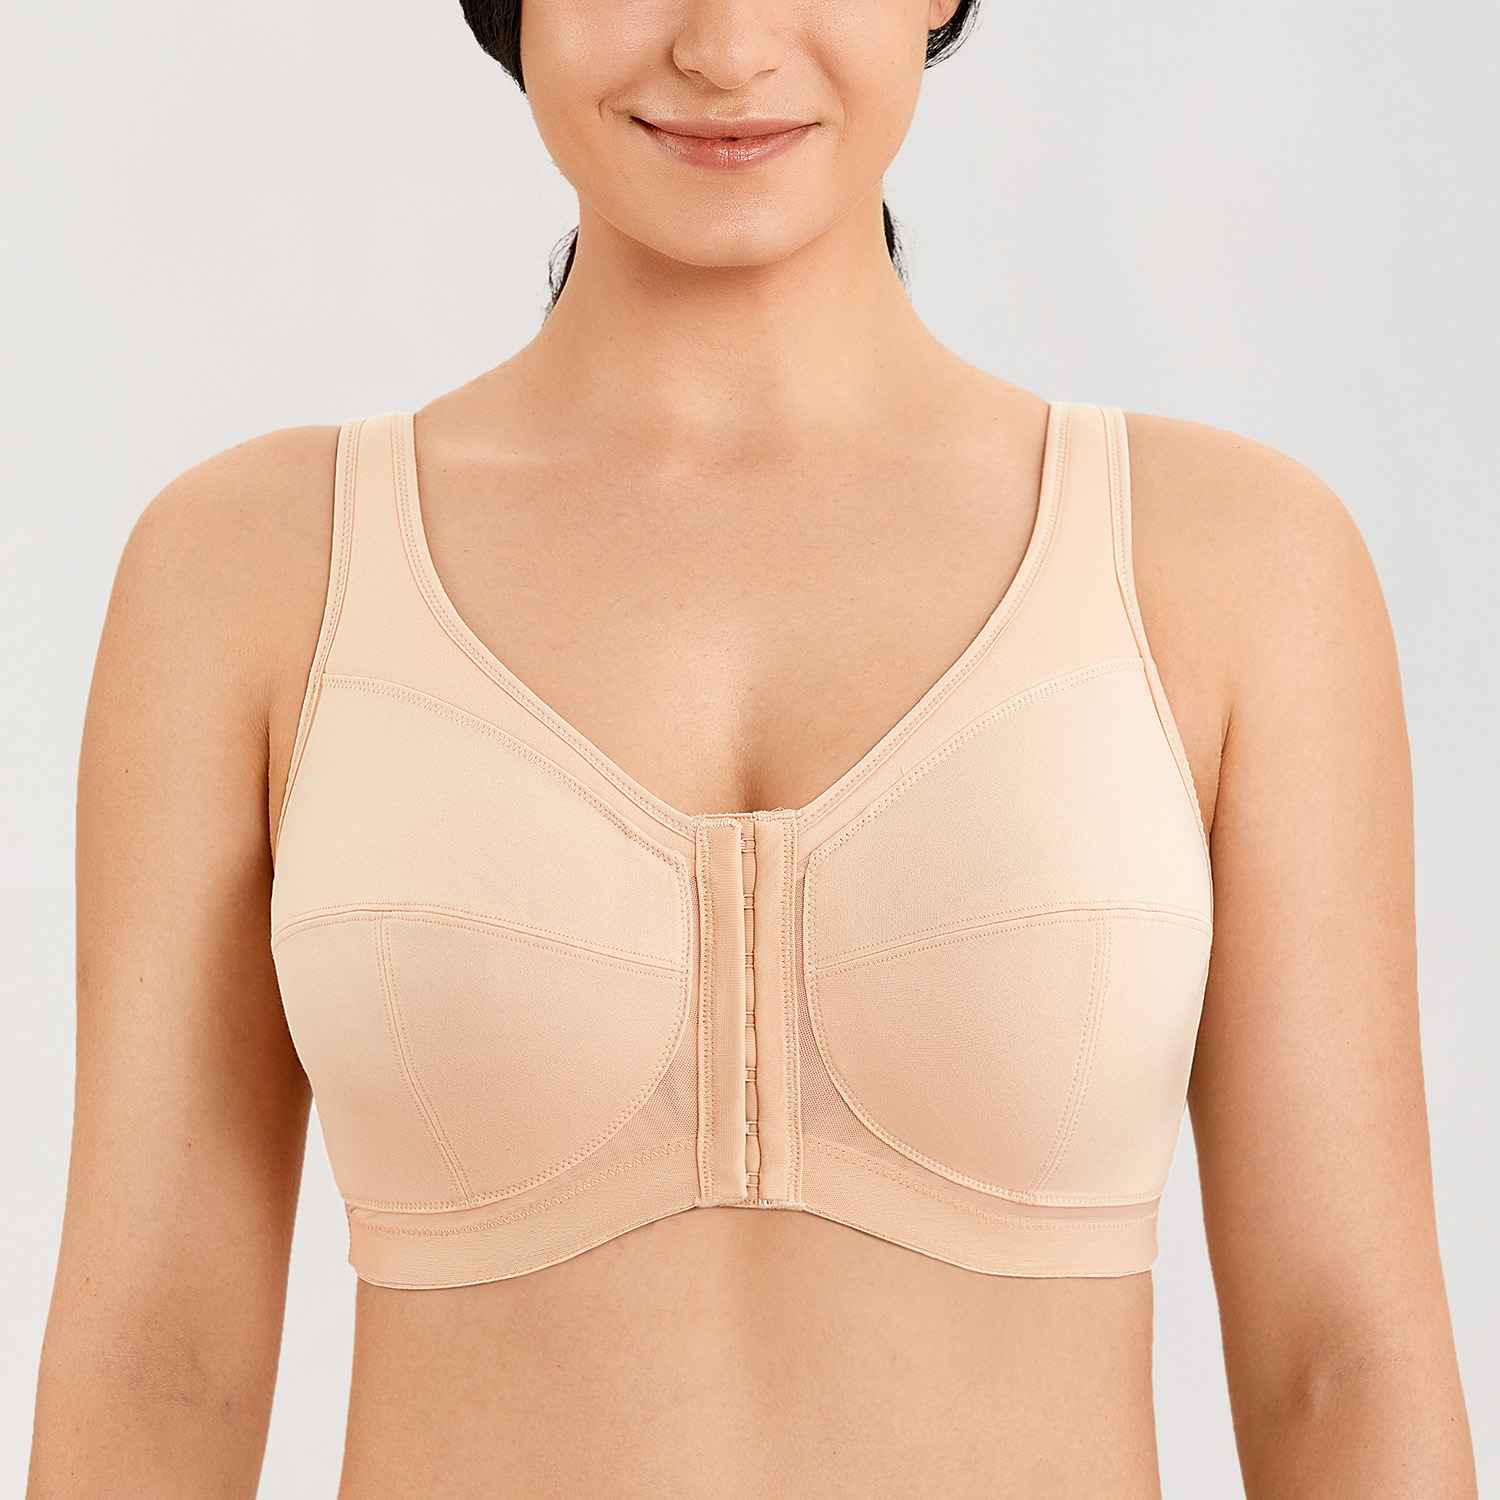 Women S Front Closure Bra Wireless Back Support Full Coverage Posture